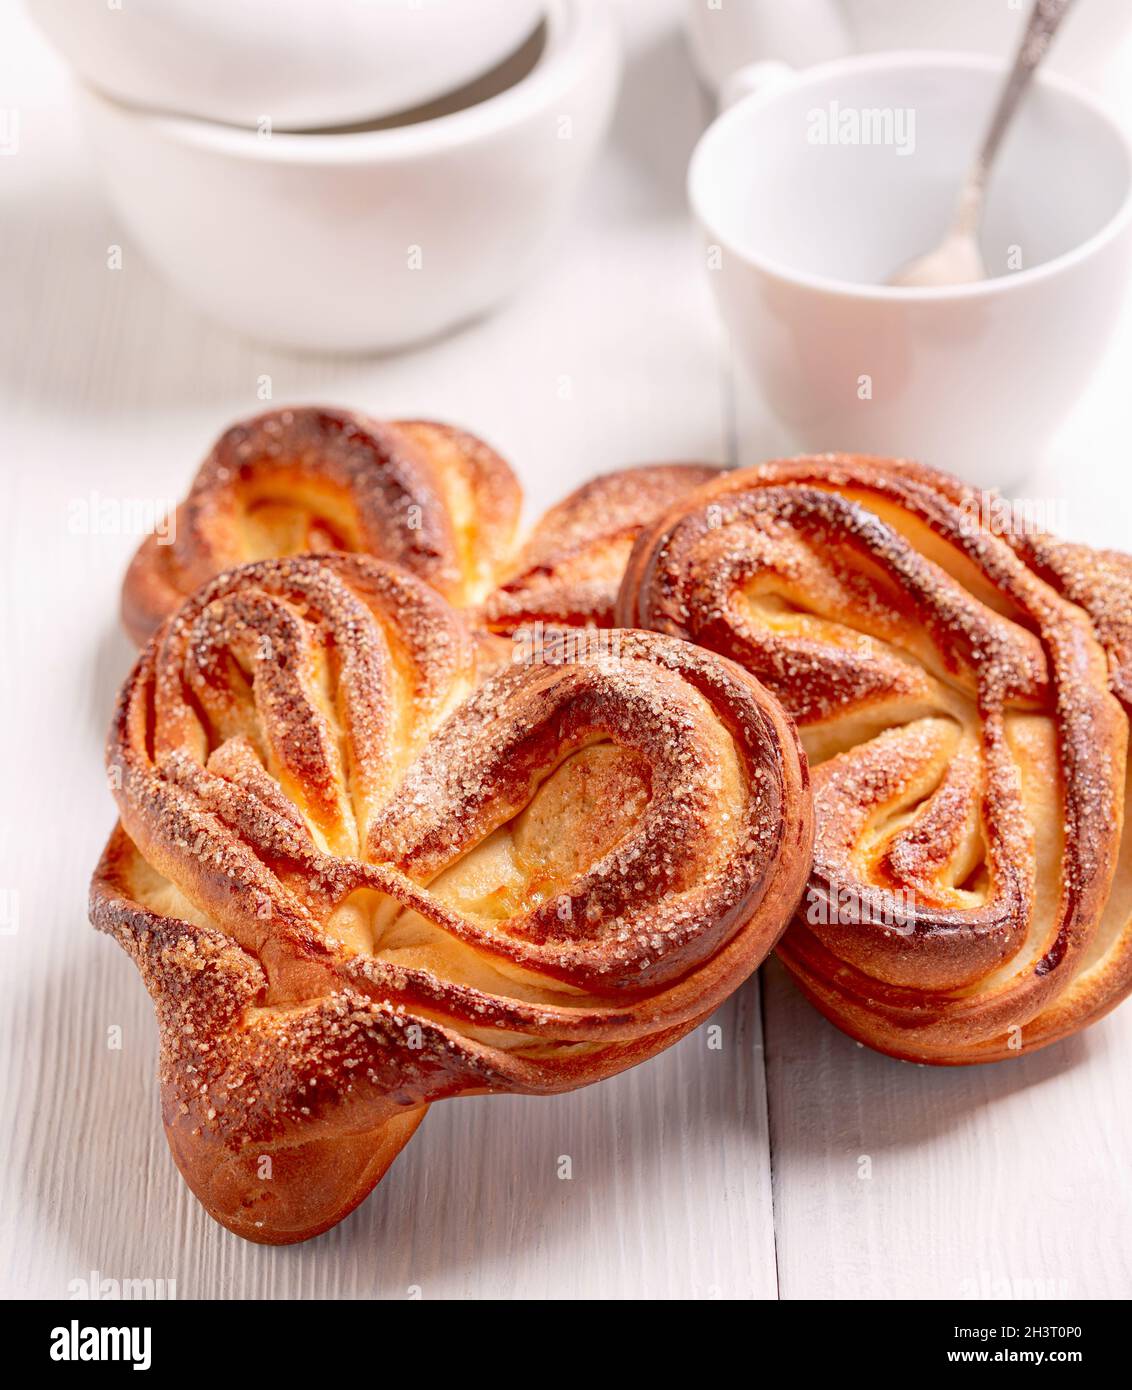 Sweet swirling buns sprinkled with sugar. Stock Photo